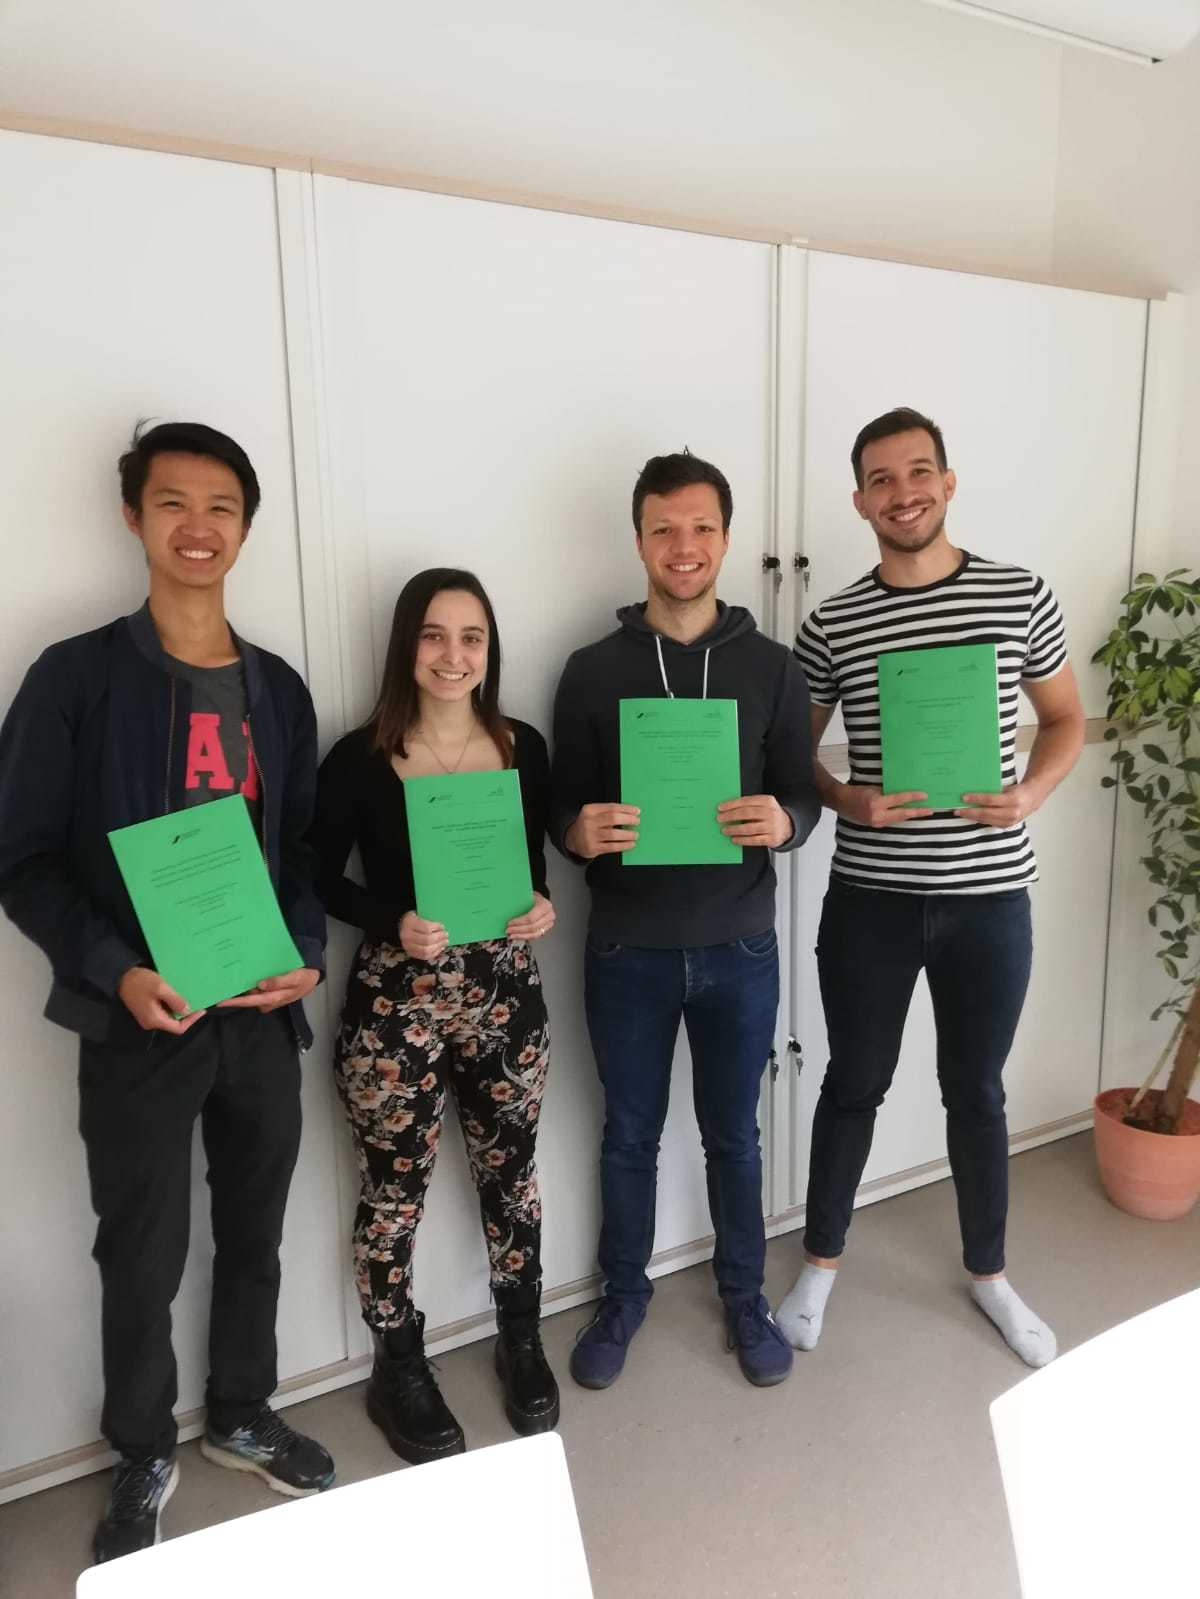 Andrea, José Miguel, Kai2, Sara, and Kai1 have handed in their master theses - congratulations!